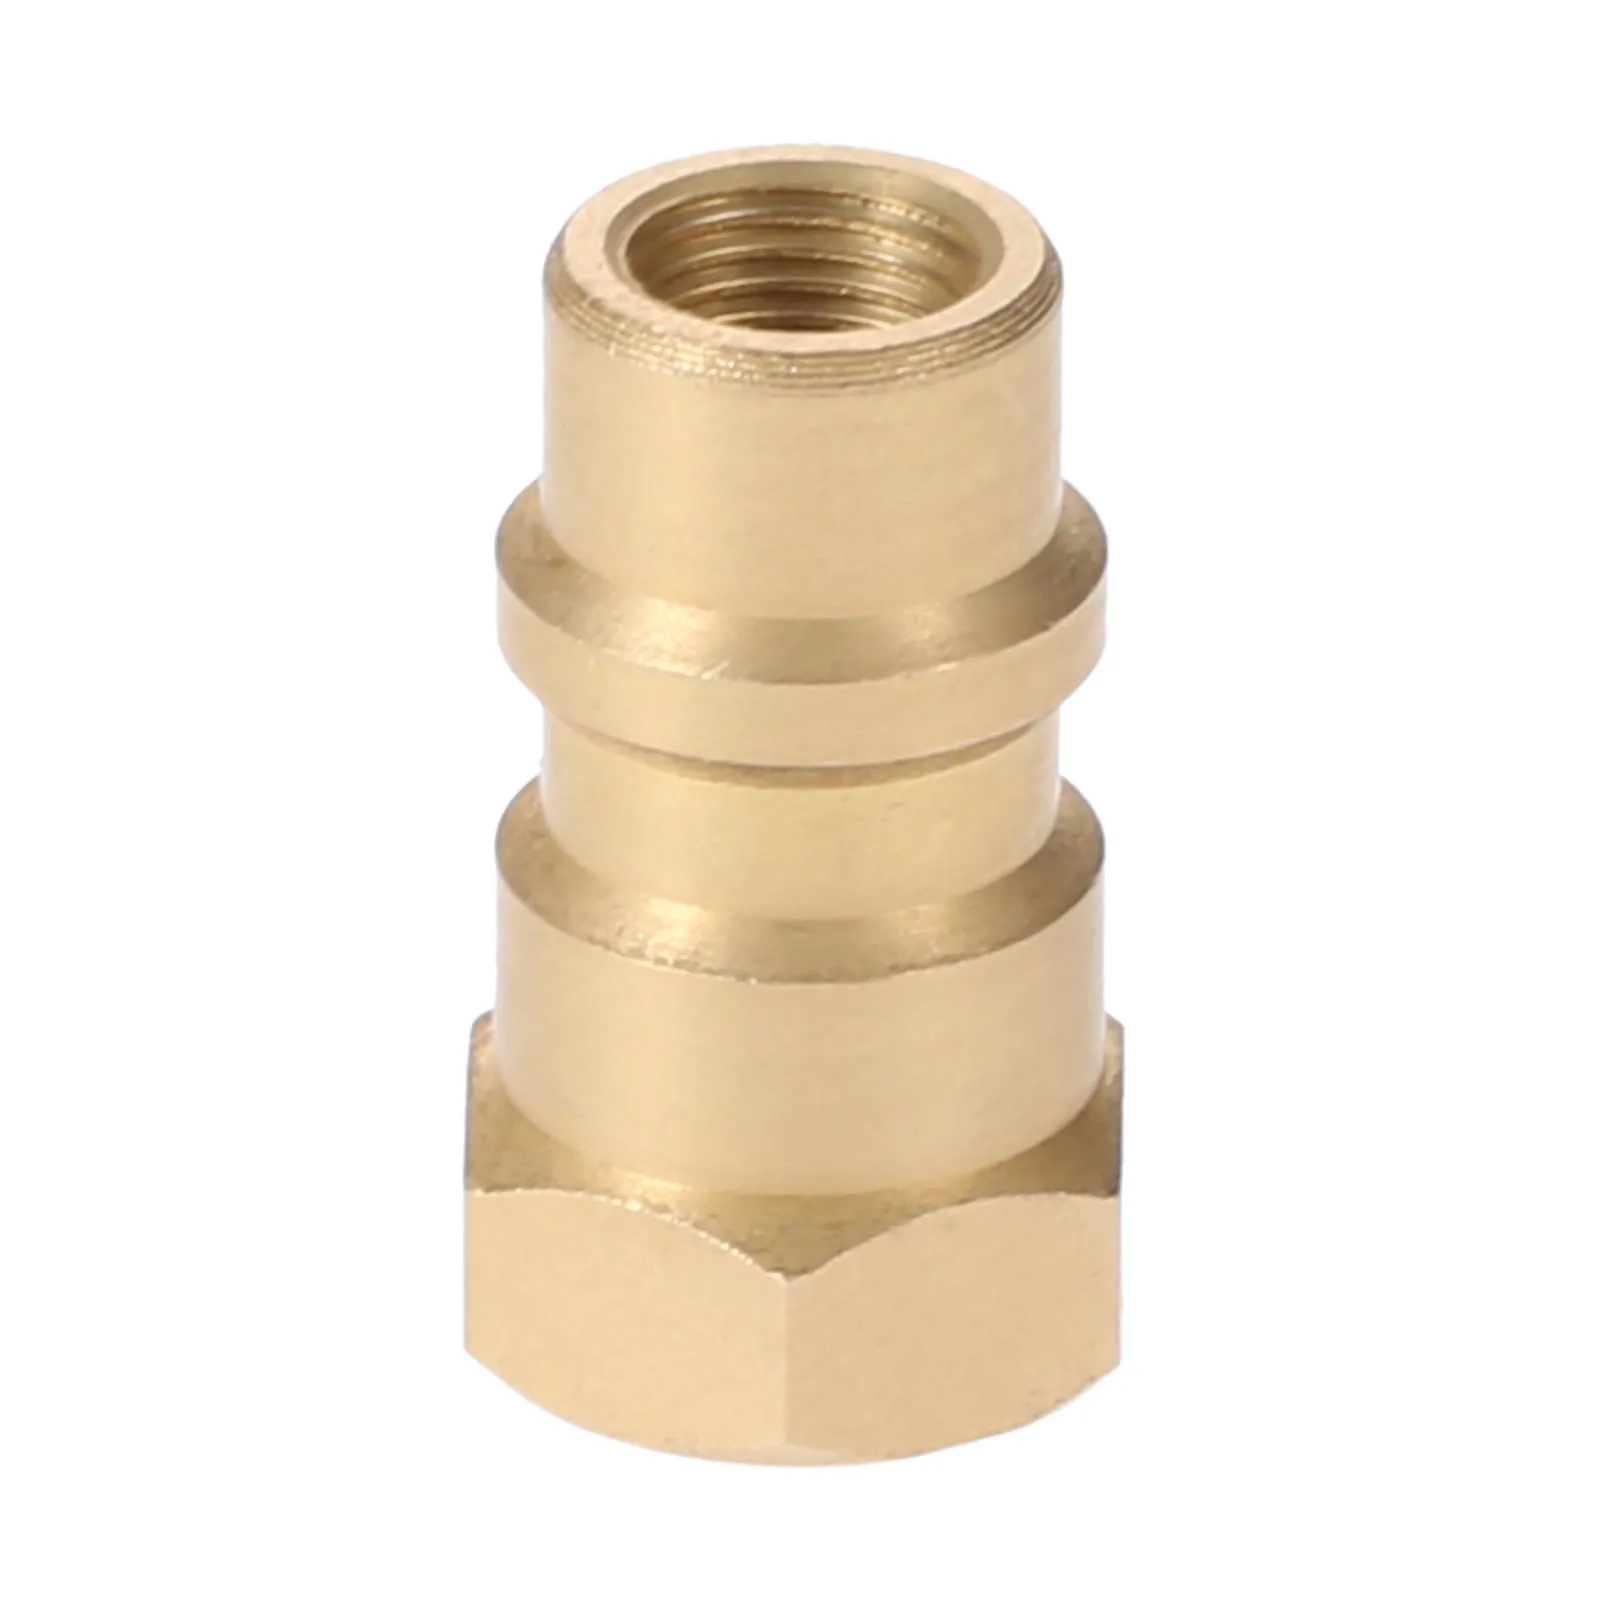 1Pc R12 R22 R502 Screw To R134A Fast Conversion Adapter Valve 1/4'' SAE To 8v1 Thread Brass Car Air-conditioning Installation images - 6